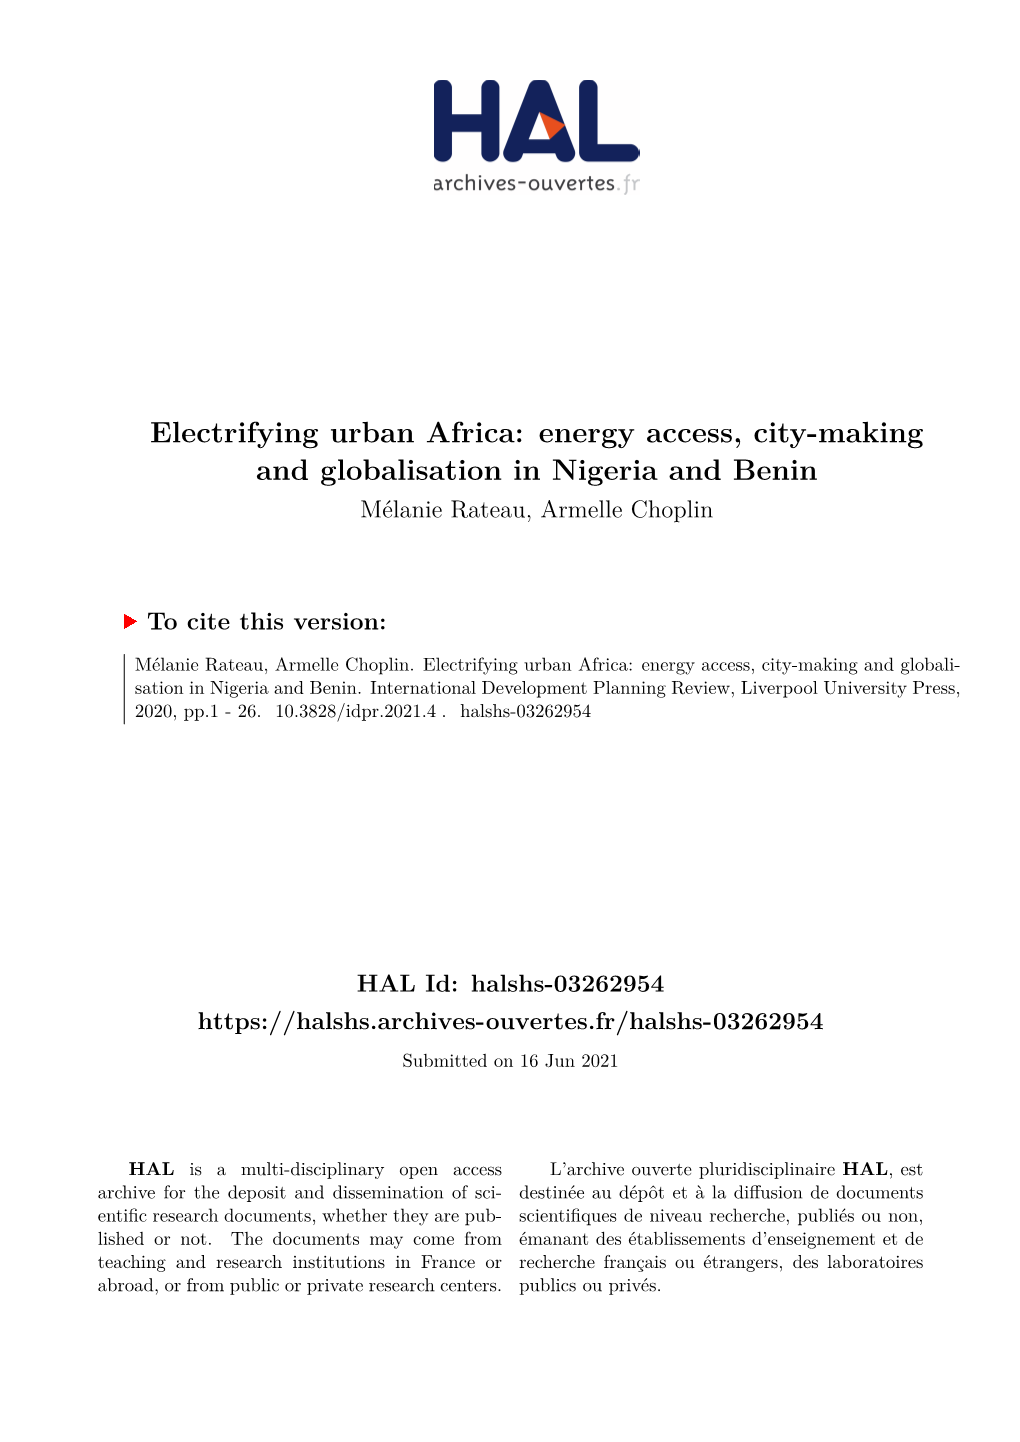 Electrifying Urban Africa: Energy Access, City-Making and Globalisation in Nigeria and Benin Mélanie Rateau, Armelle Choplin